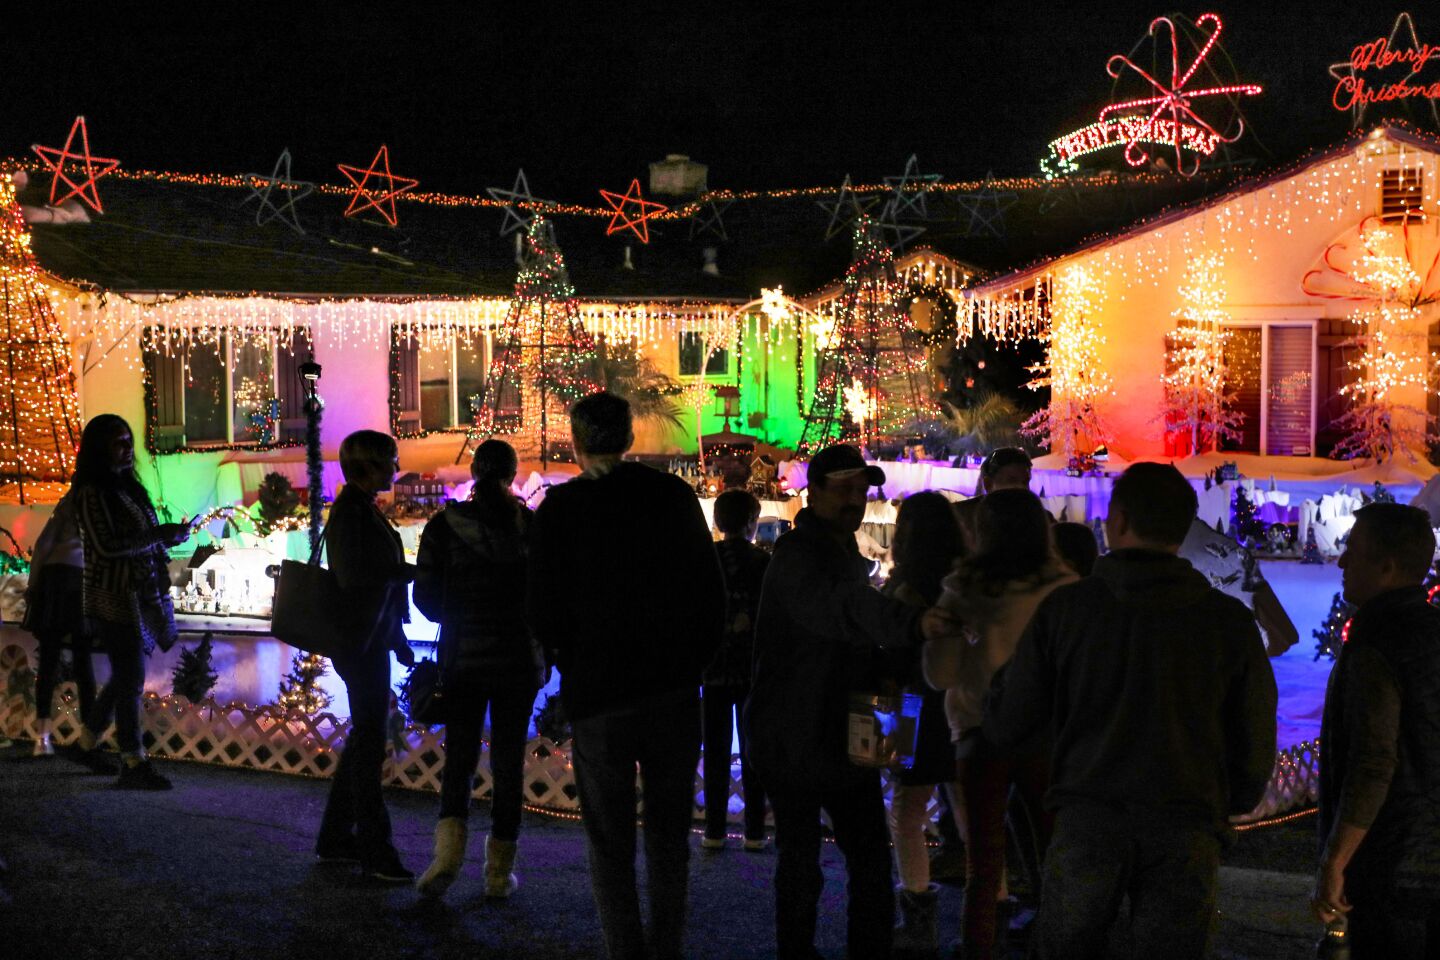 Visitors to the home of Mack Schreiber get a close look at part of the extensive Christmas light display there on Reche Road in Fallbrook.